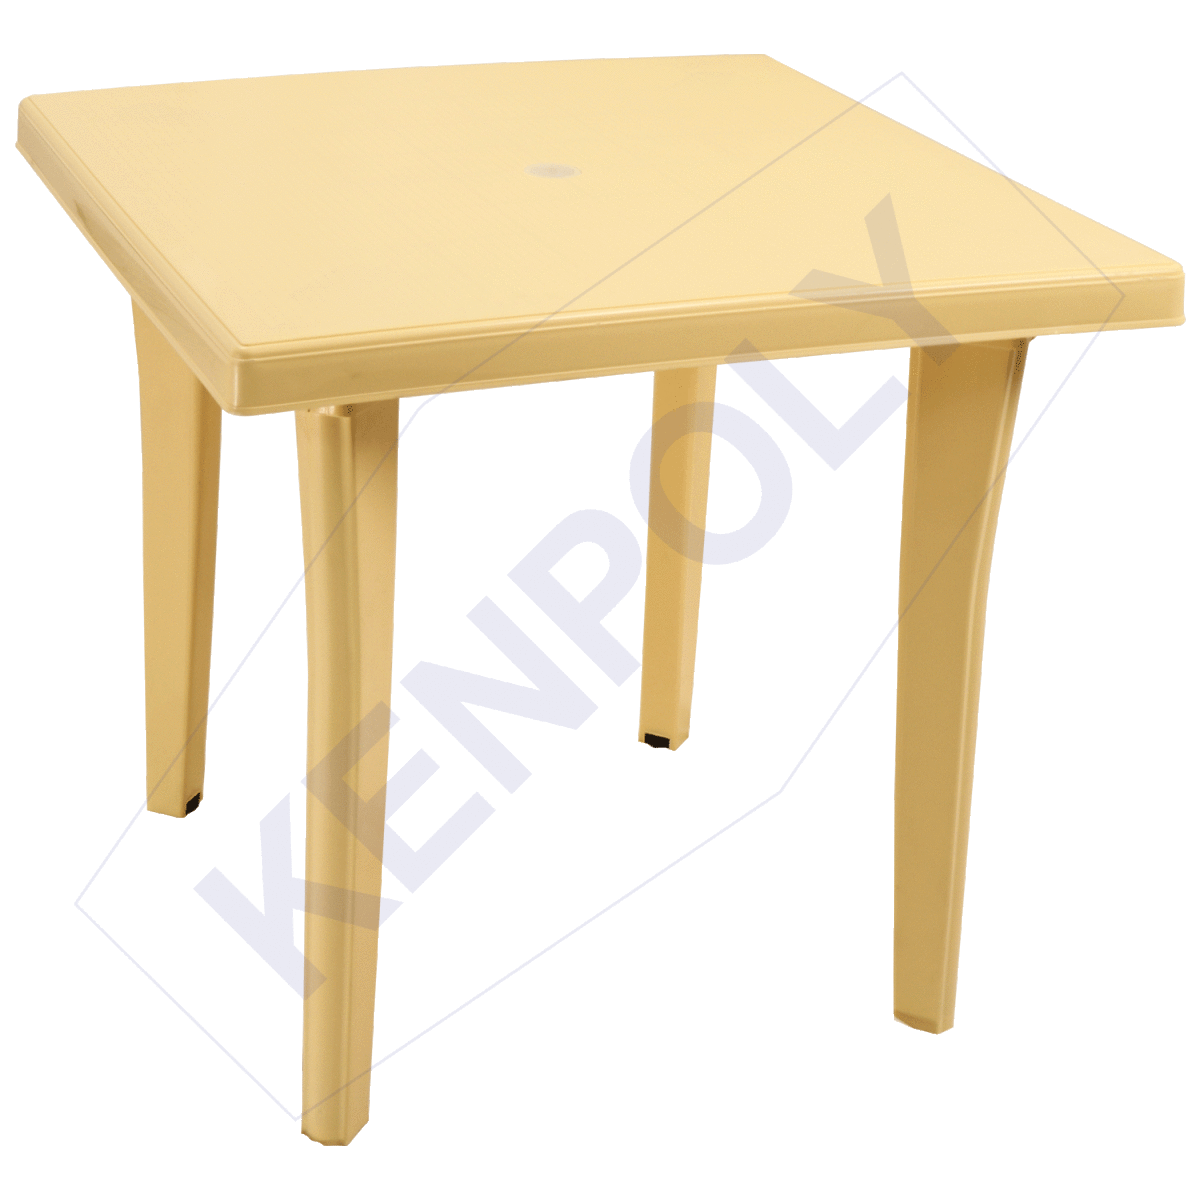 3003 Square Table